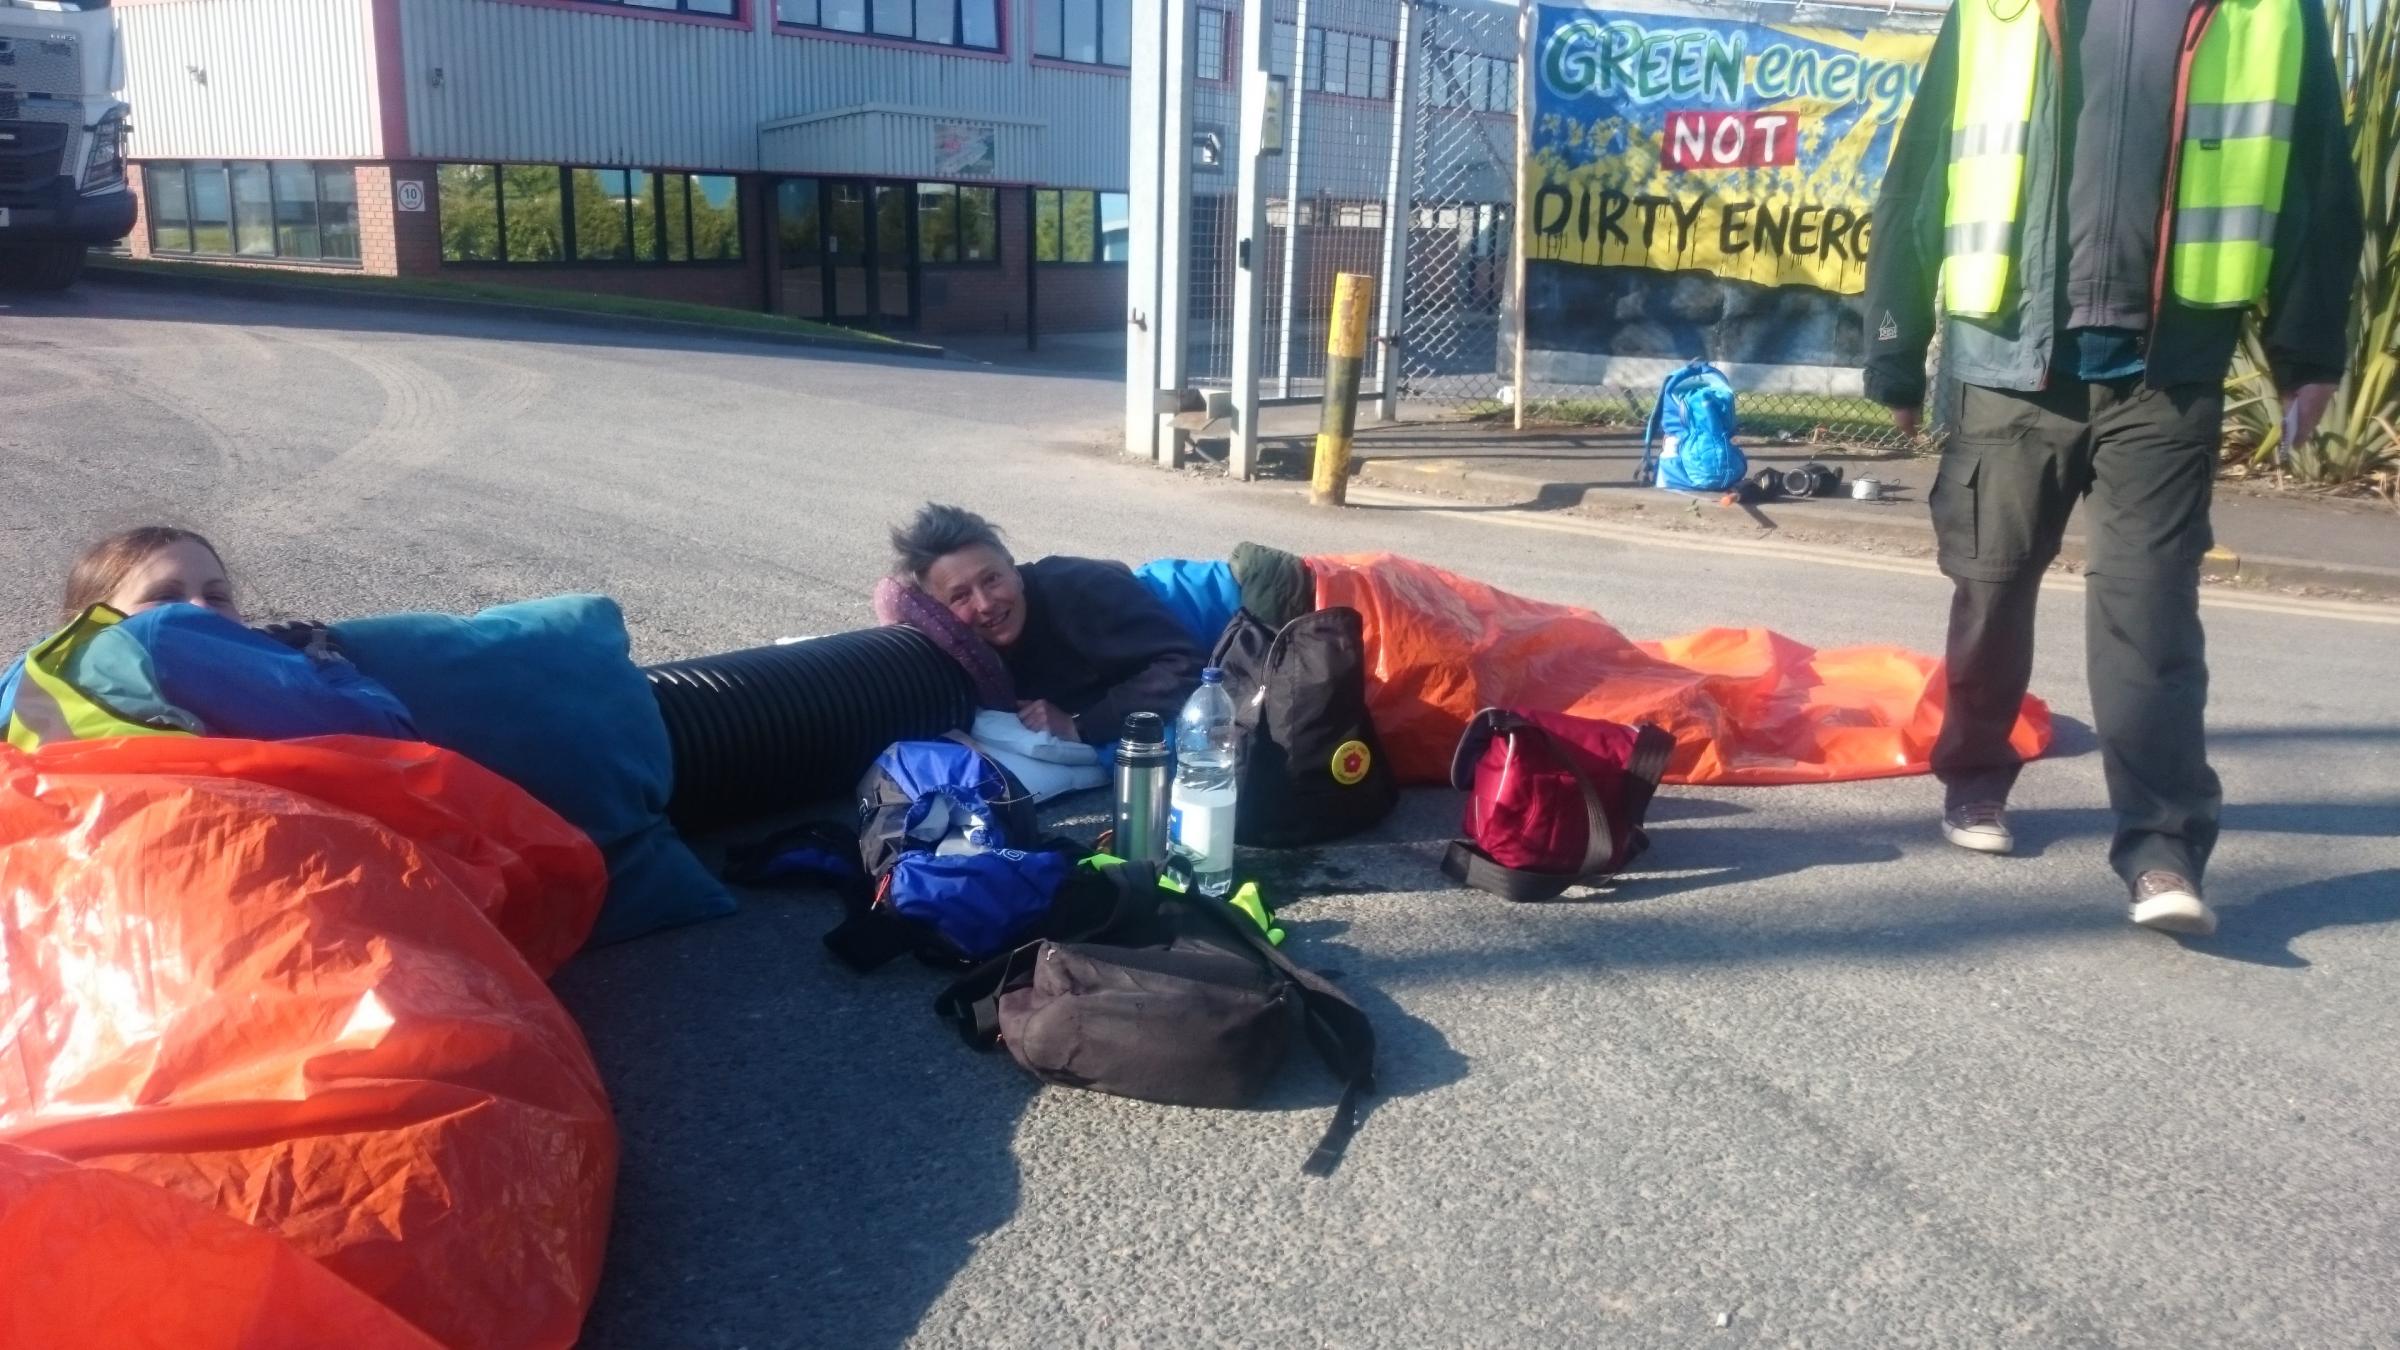 PROTEST: The two campaigners lying in the road